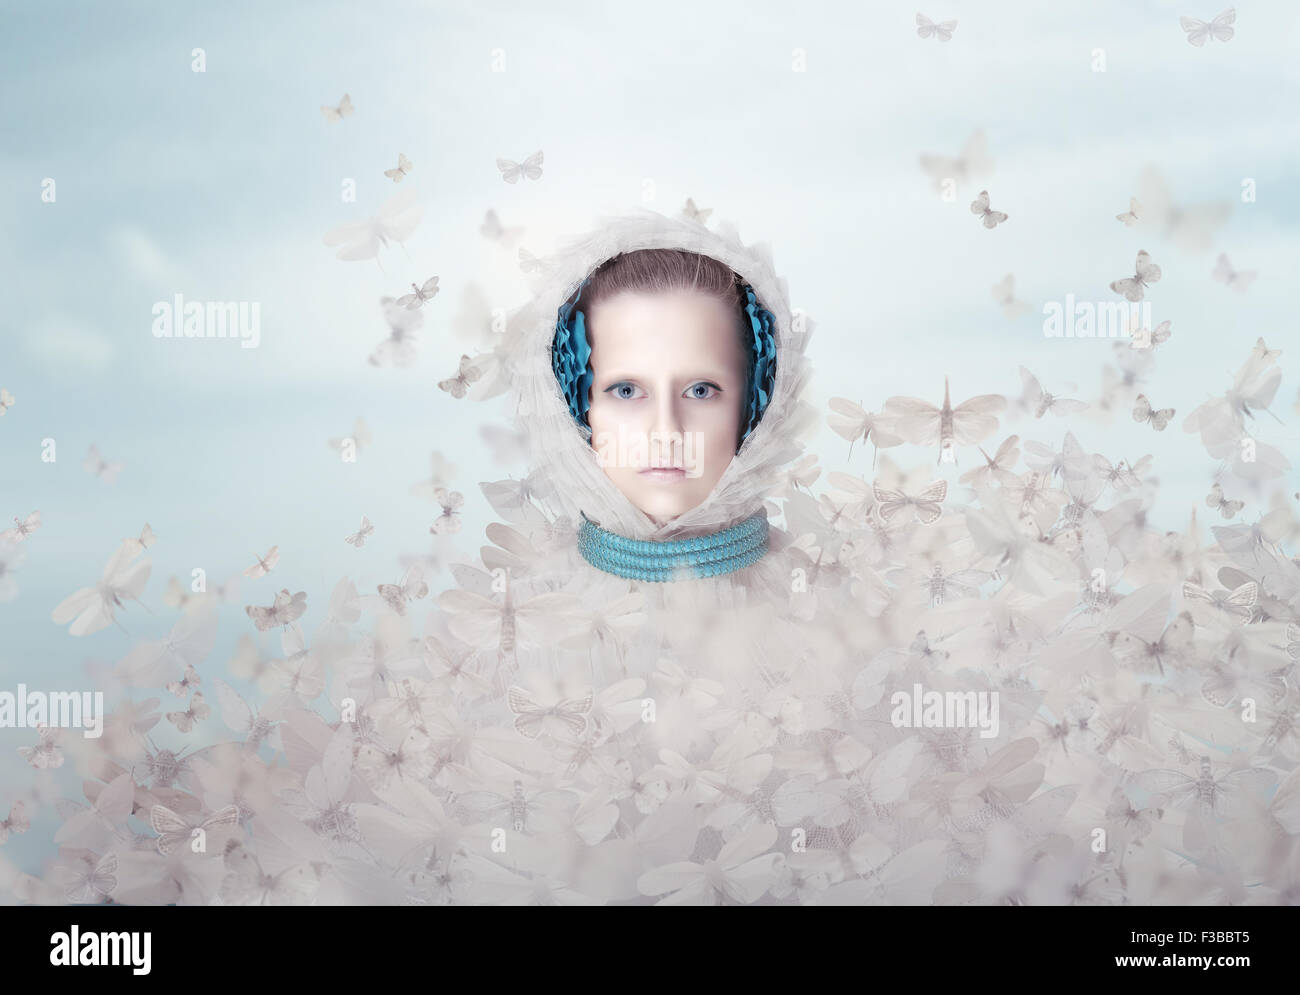 Fantasy. Futuristic Woman with Flying Butterflies Stock Photo